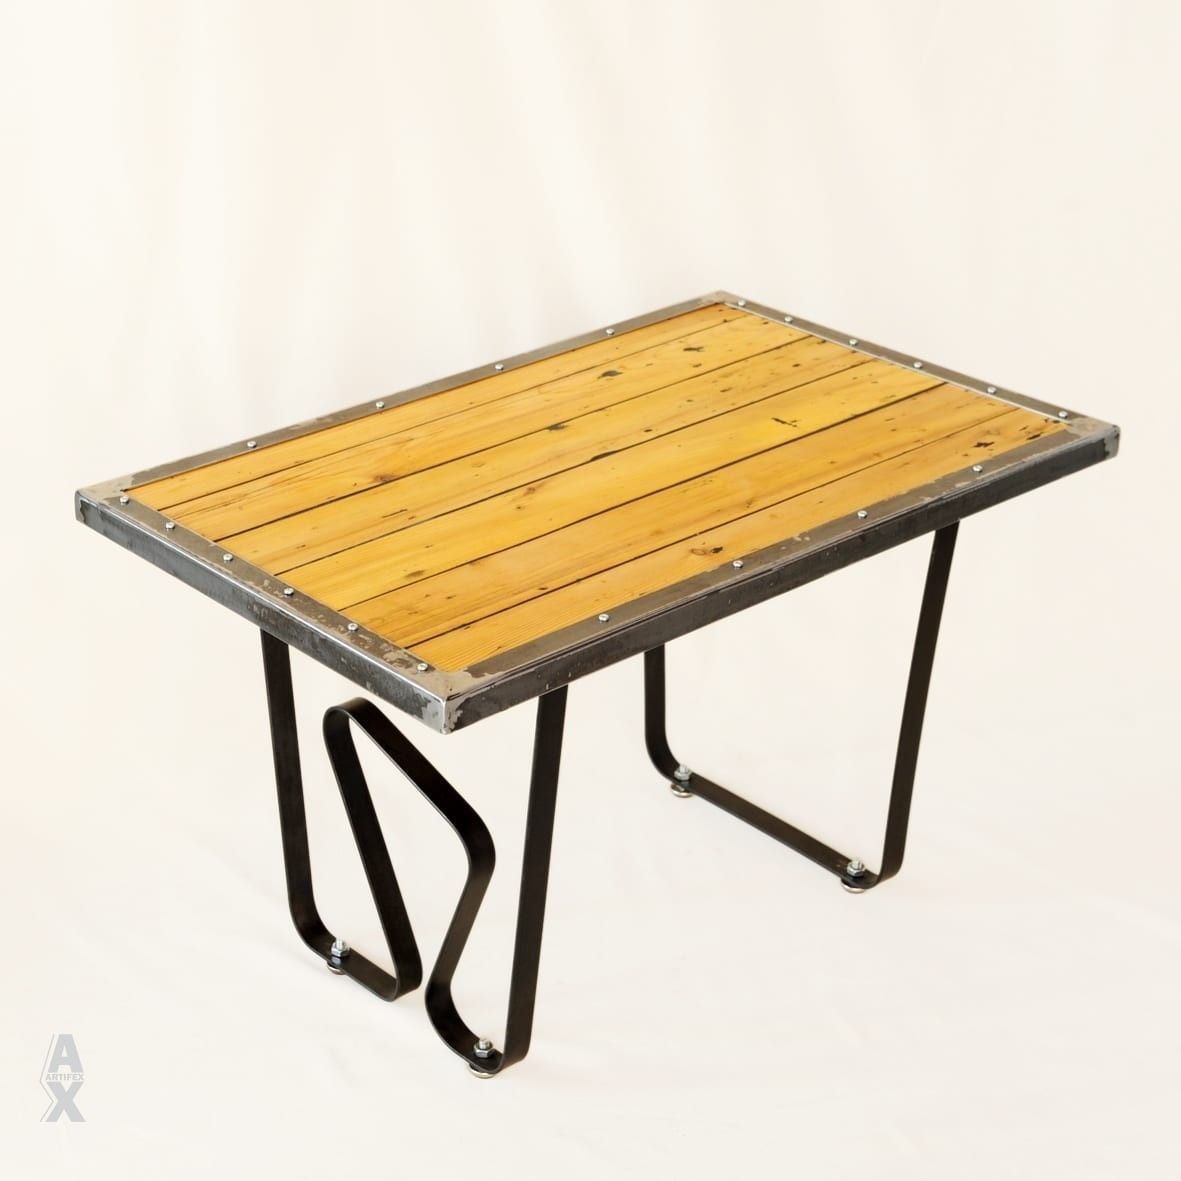 Artifex - Table basse